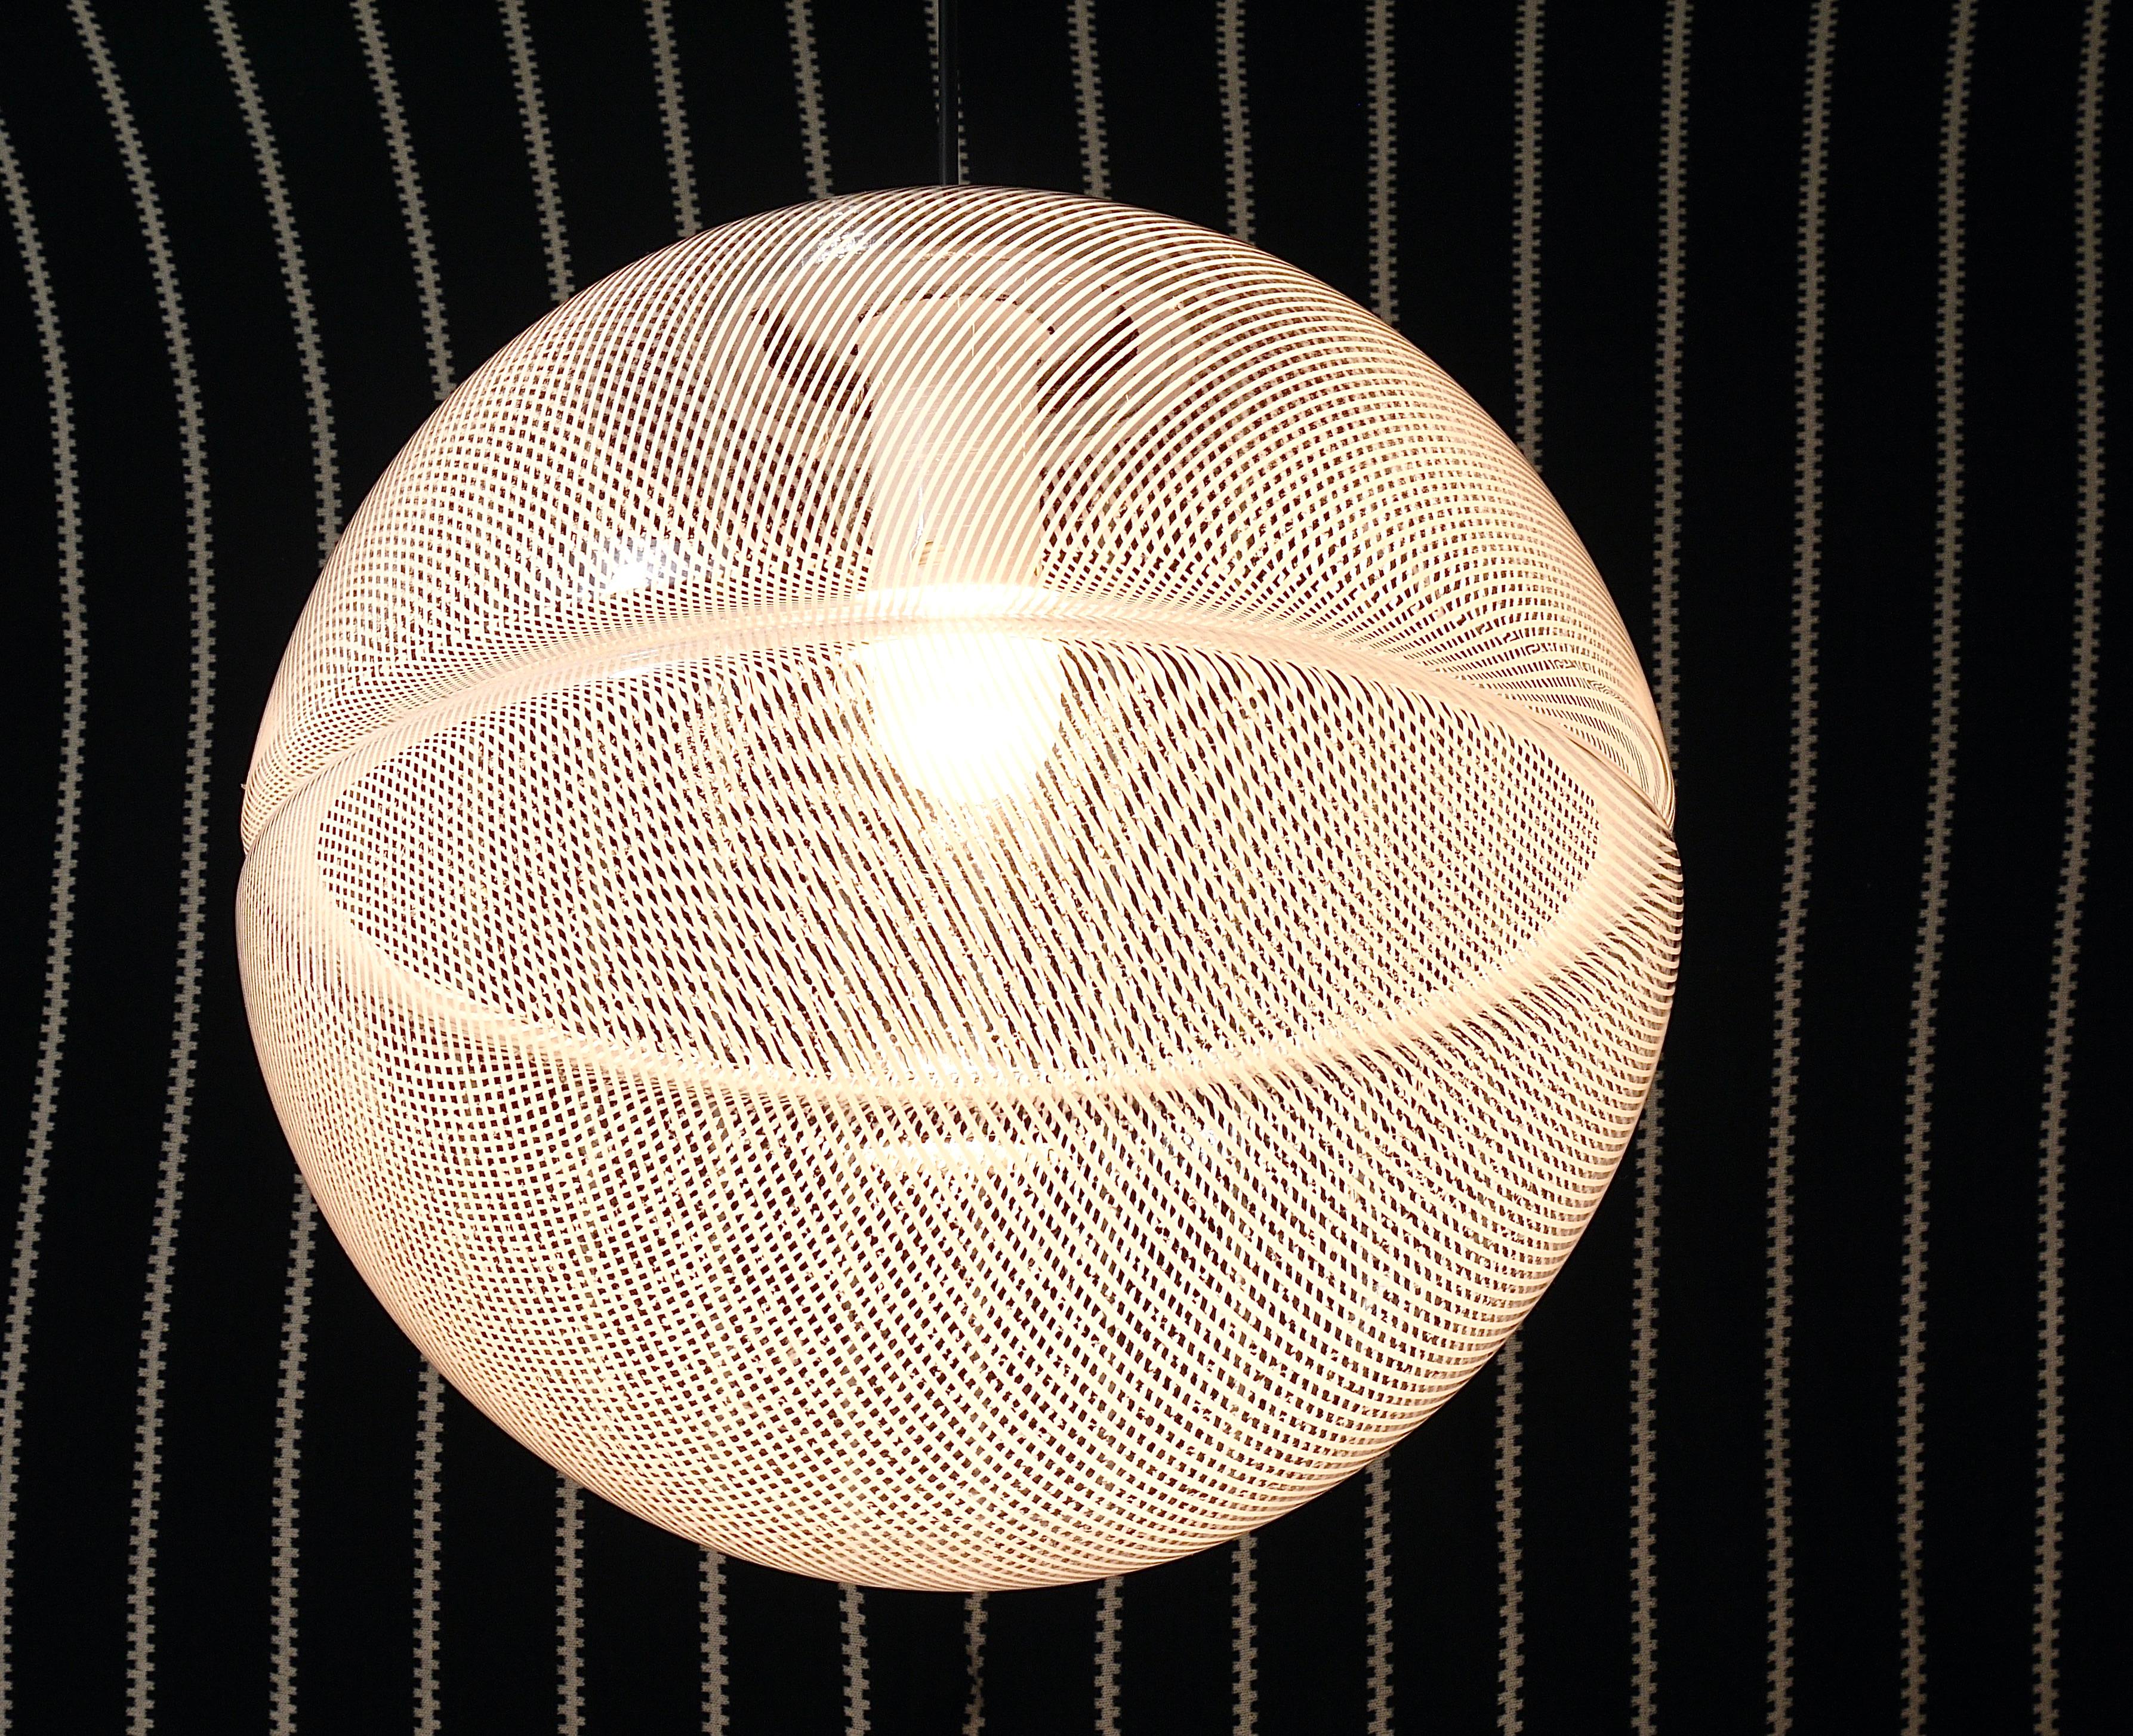 A large, striped postmodern Op-Art pendant lamp from the 1970s, designed by Harvey Guzzini for Meblo. The lamp features a very large round globe lampshade (diameter 15